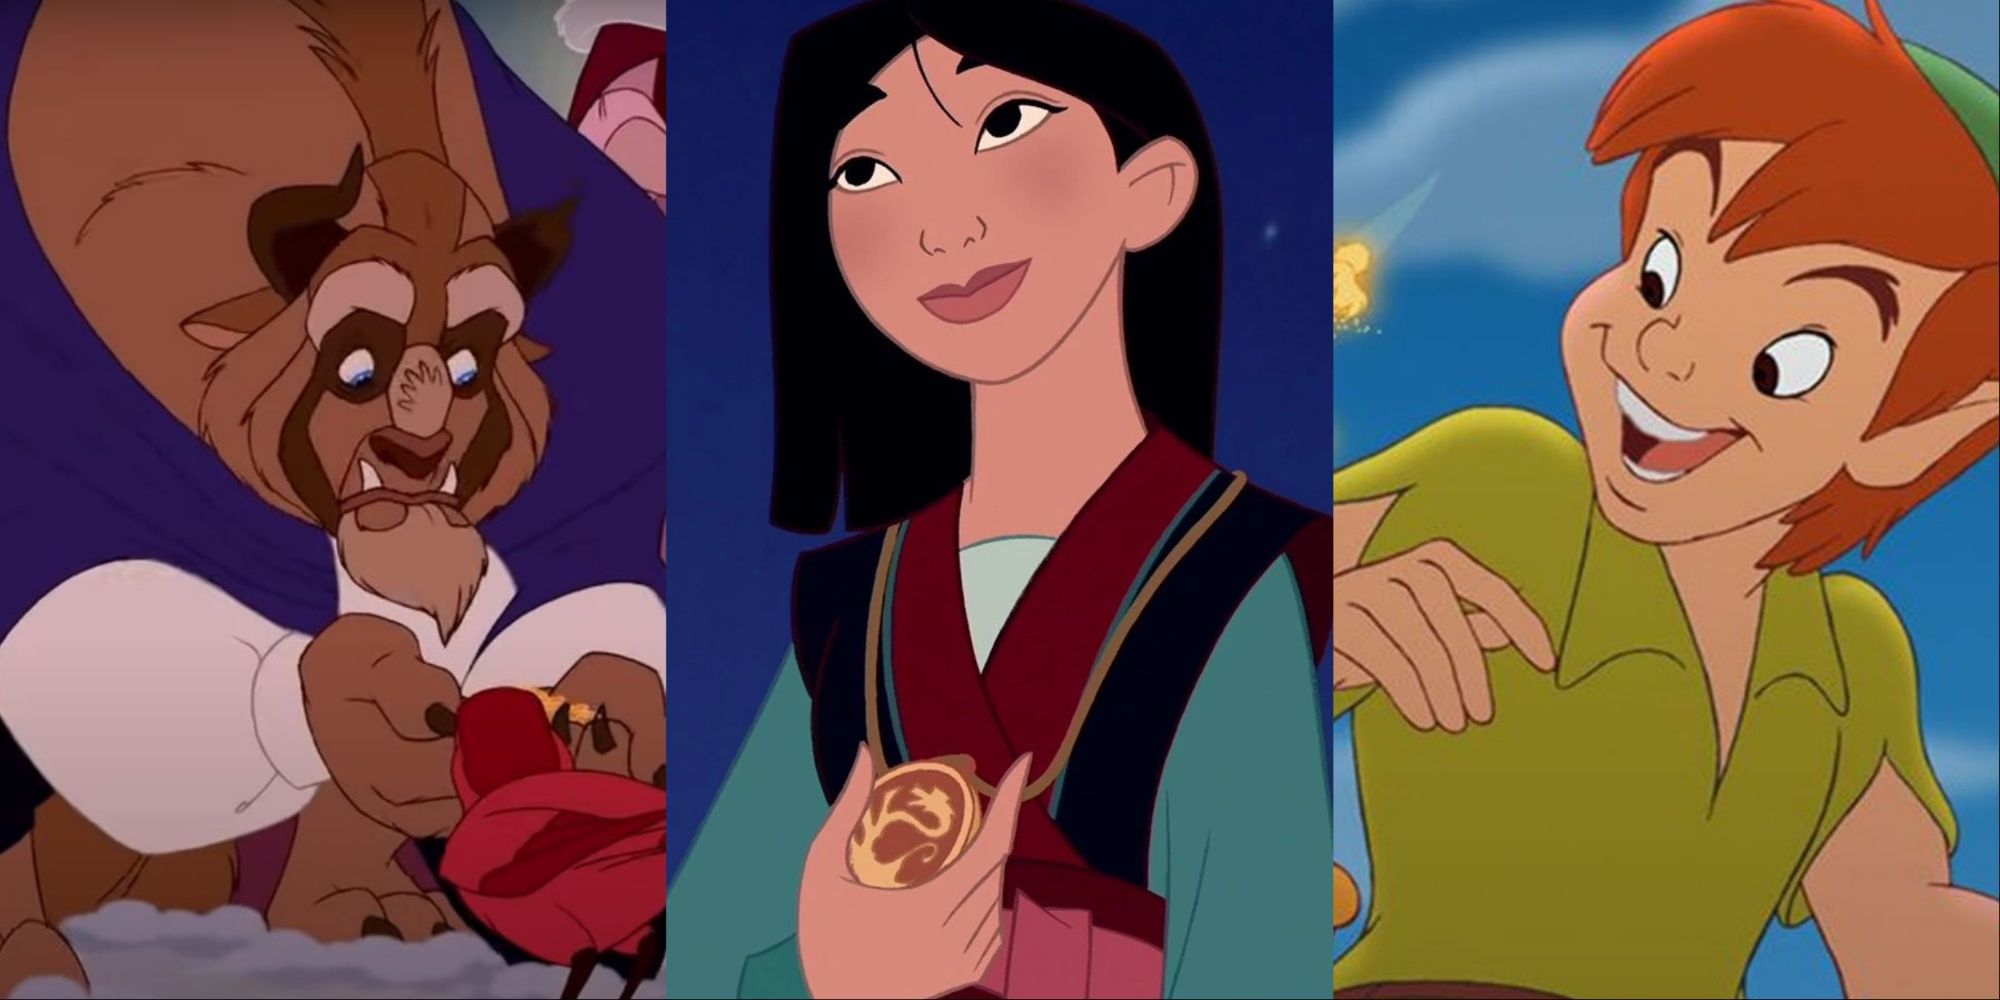 Beauty And The Beast, Mulan, Peter Pan Featured